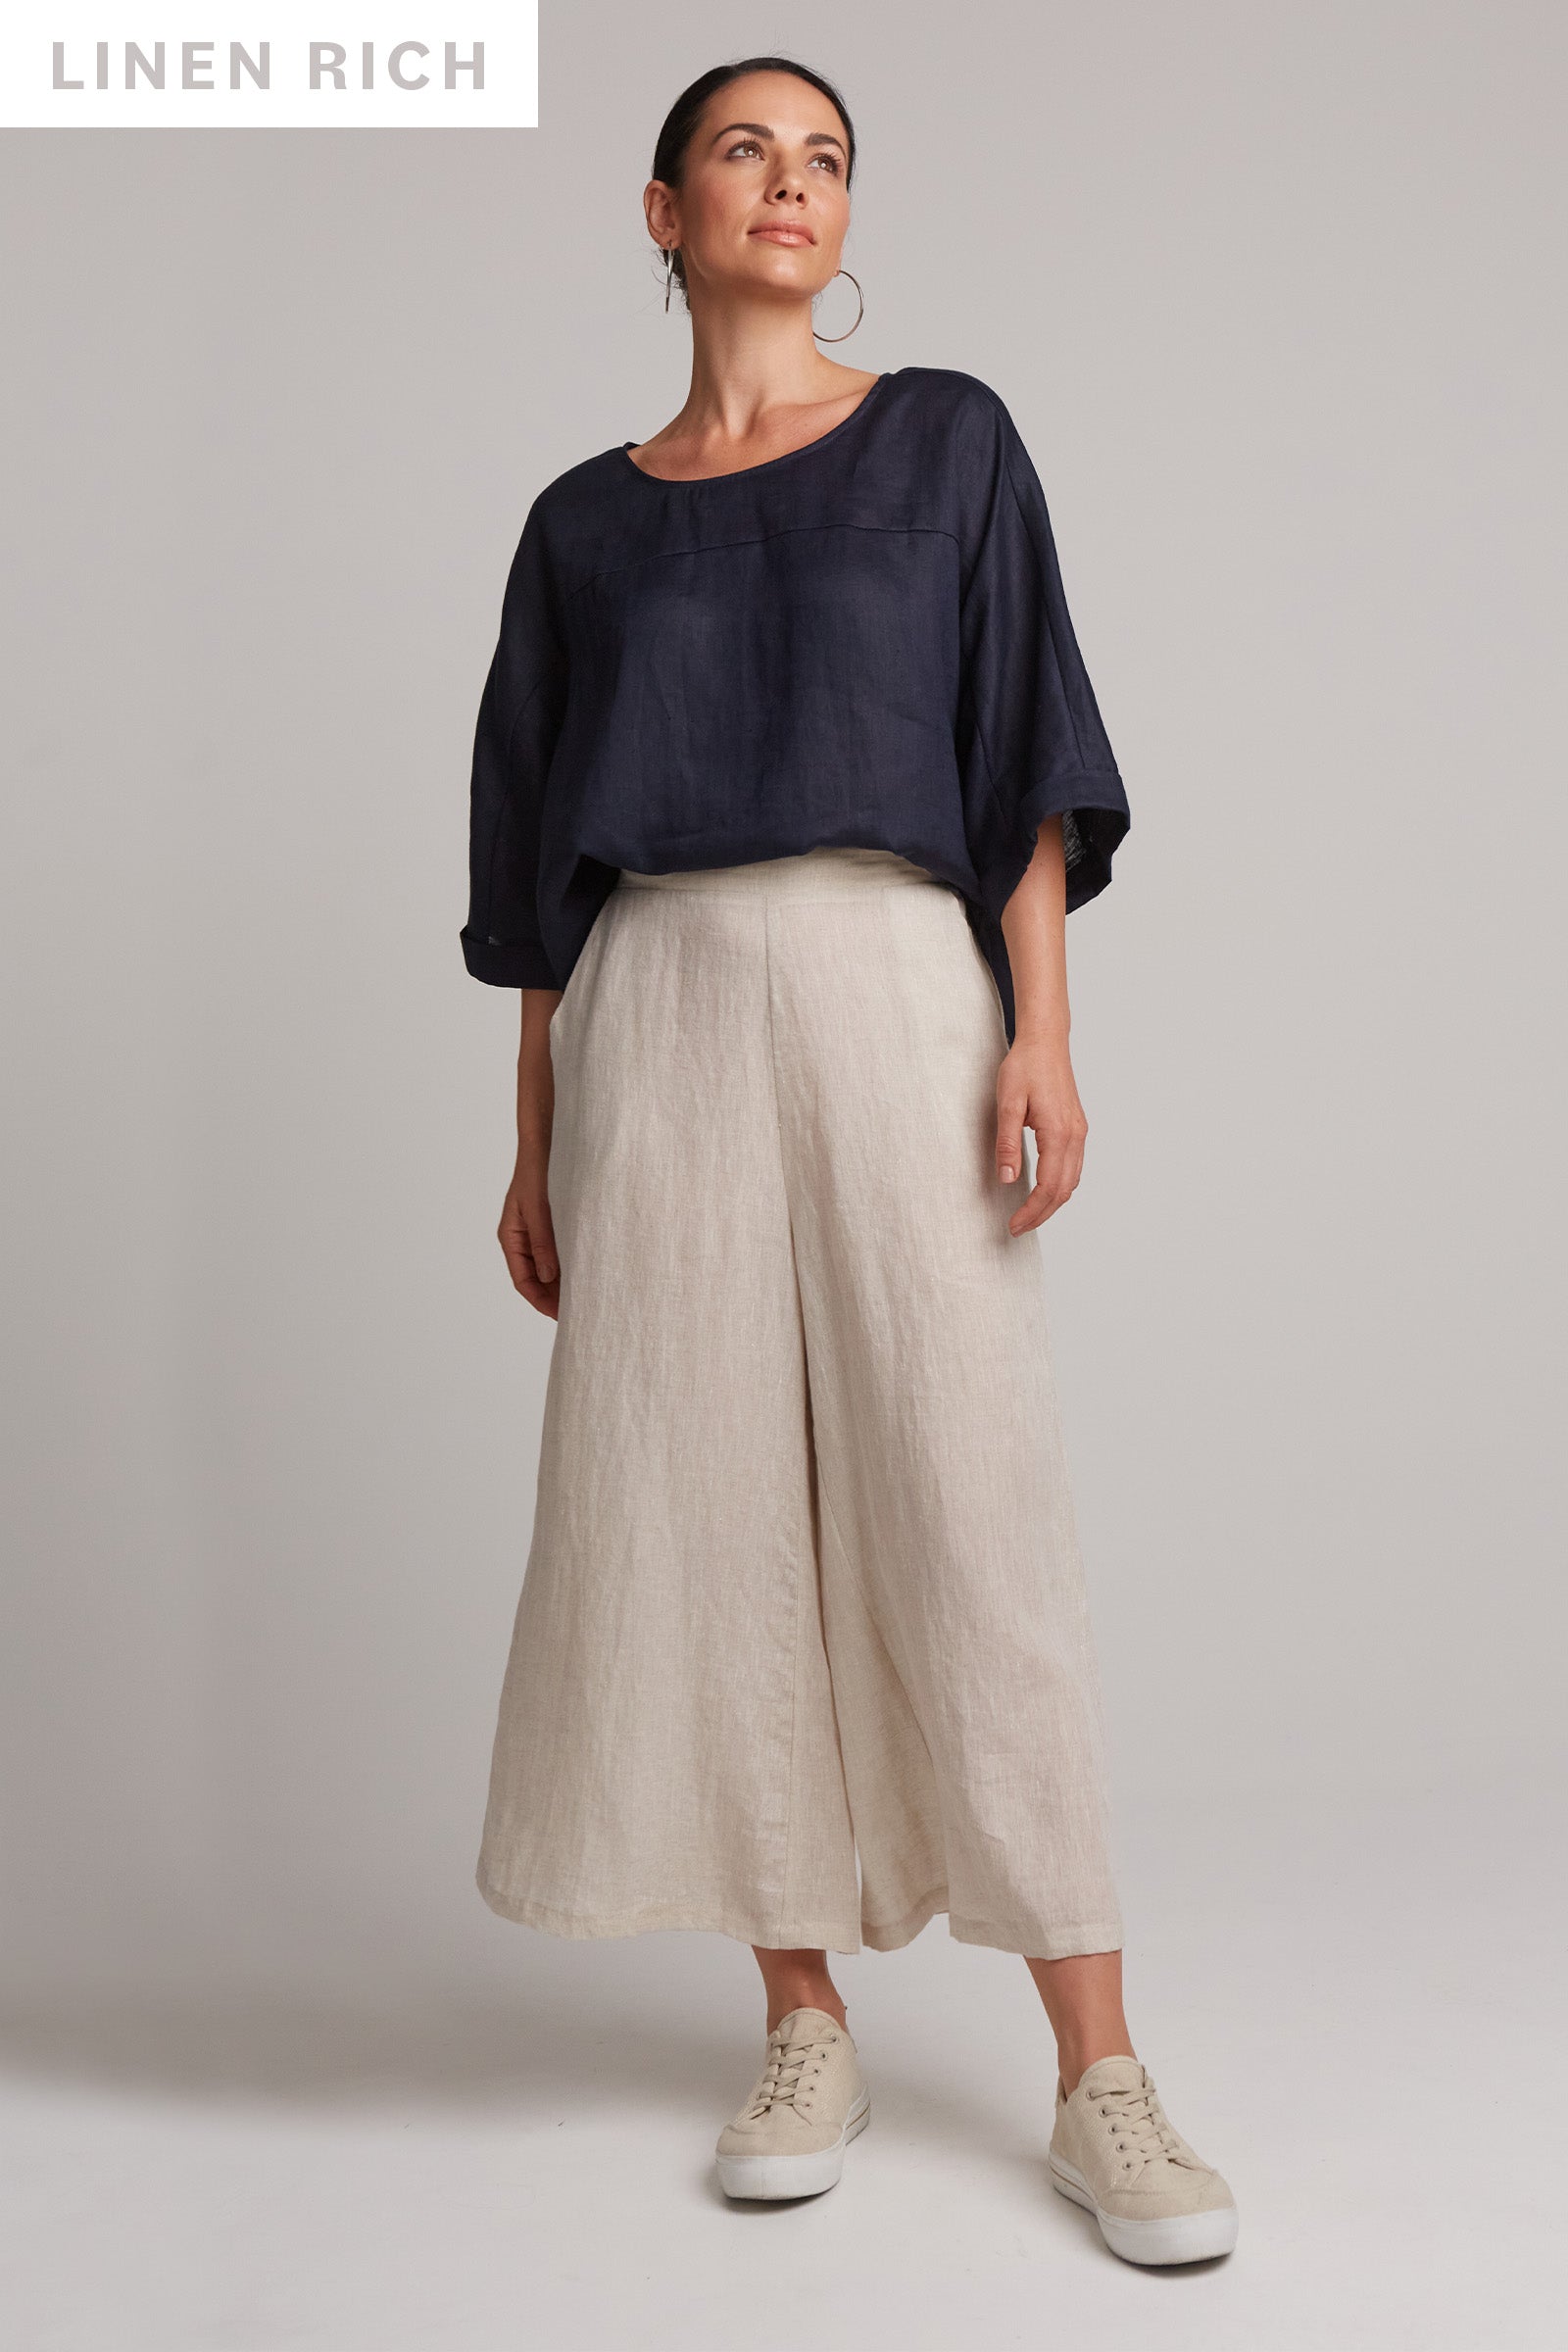 Studio Crop Pant - Tusk - eb&ive Clothing - Pant Relaxed Crop Linen